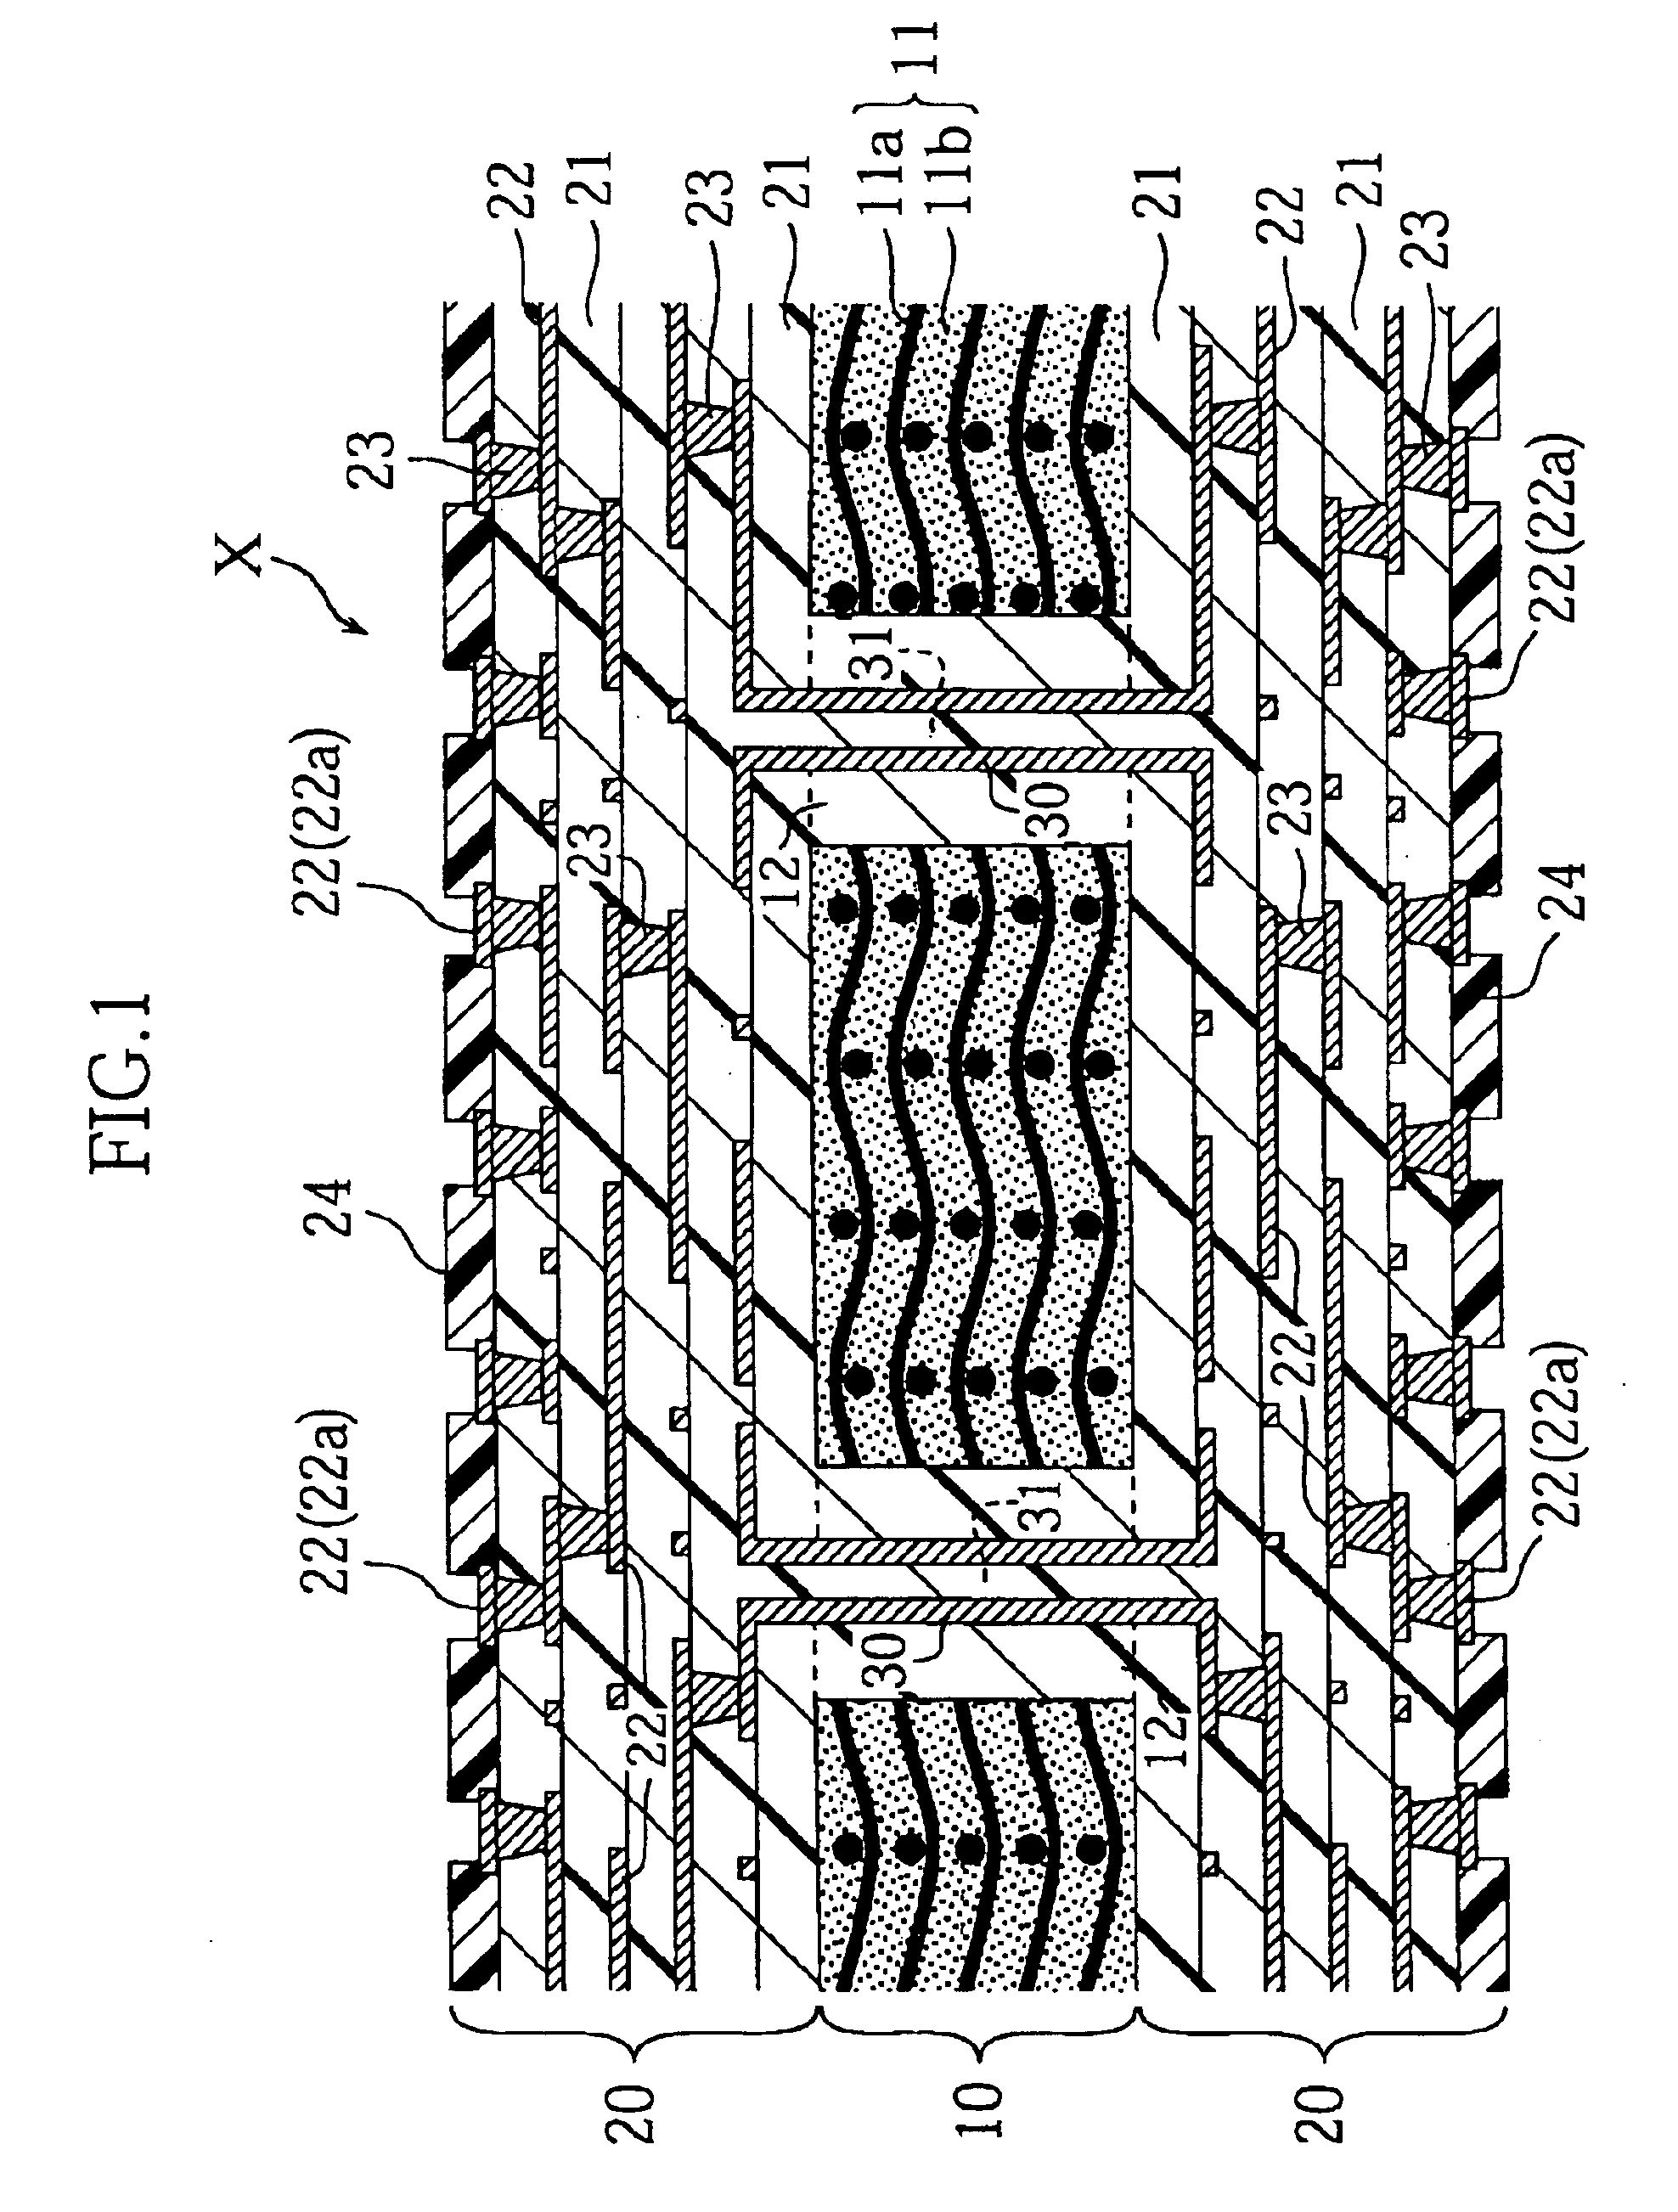 Wiring board with core layer containing inorganic filler